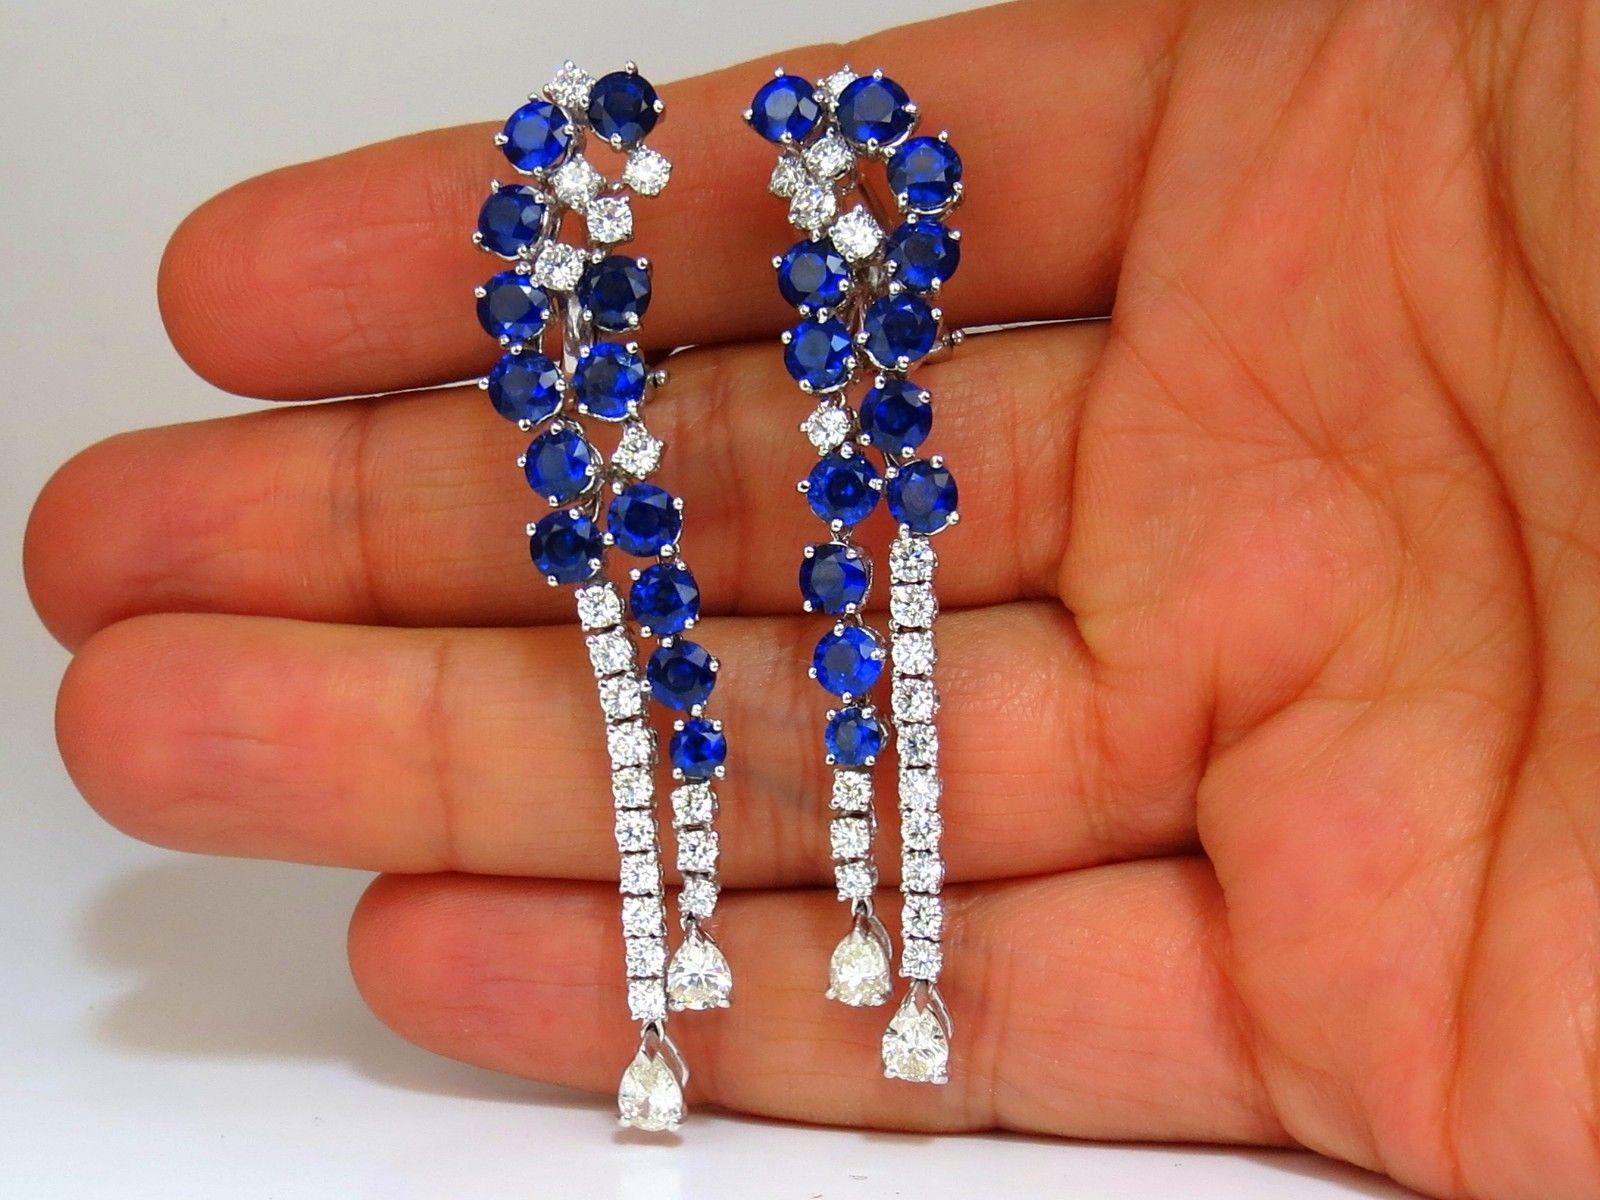 Among the royalty.

Beautiful sapphire diamonds dangle earrings.

All stones selected from the finest parcels.

12.00ct. Natural  Sapphires

Gorgeous brilliance

Fully Faceted Rare Round cut for maximum brilliance

Clean Clarity and transparent

The